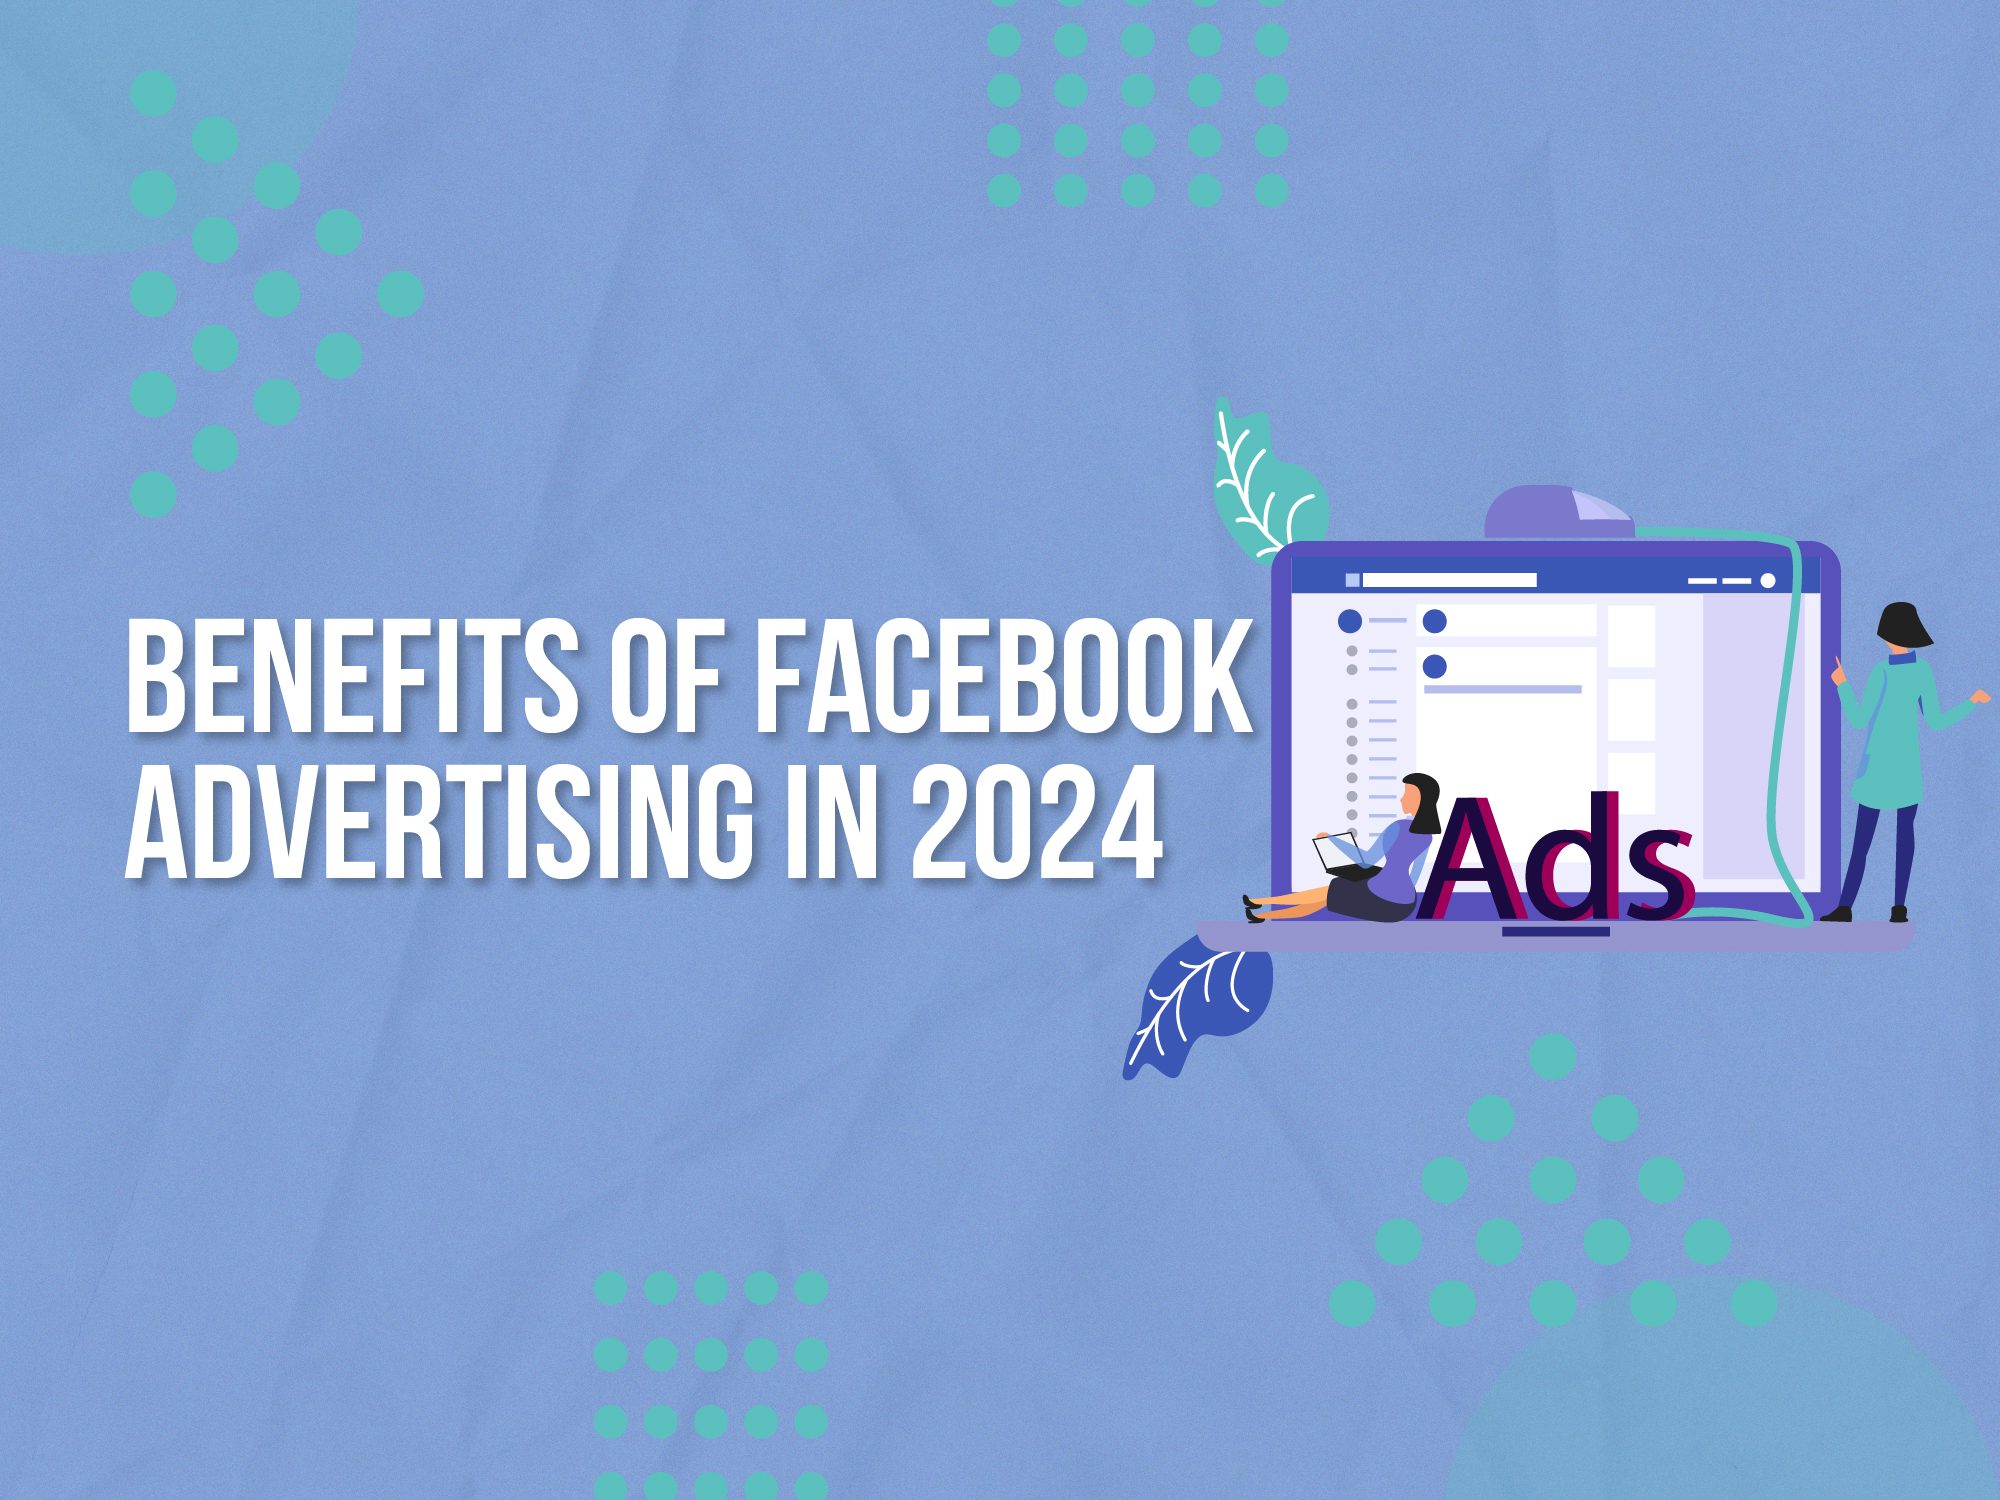 What Are The Benefits Of Facebook Marketing In 2024?